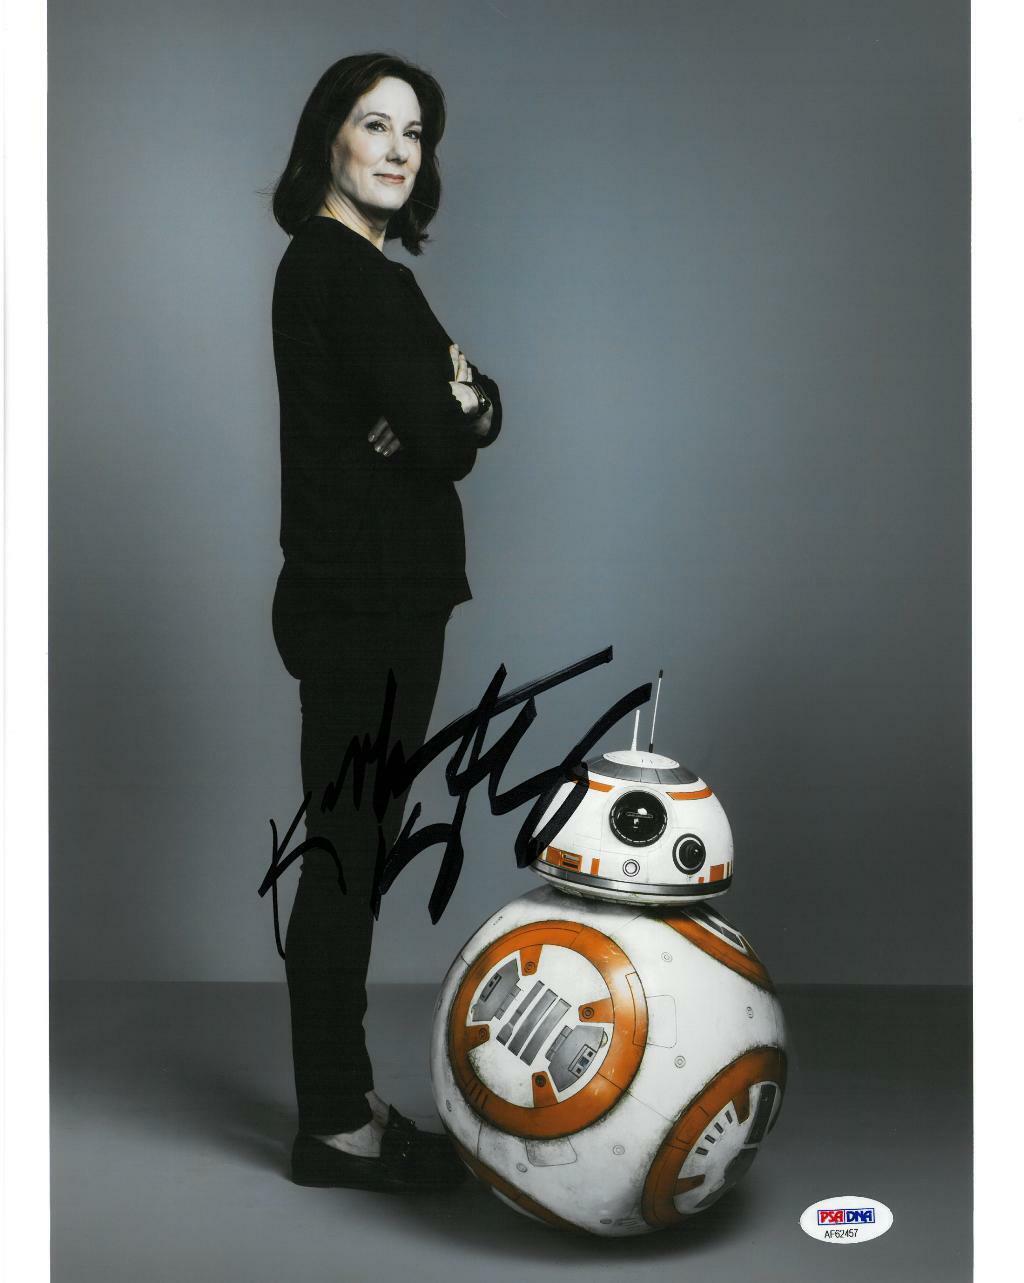 Kathleen Kennedy (Producer) Signed Star Wars Auto 11x14 Photo Poster painting PSA/DNA #AF62457